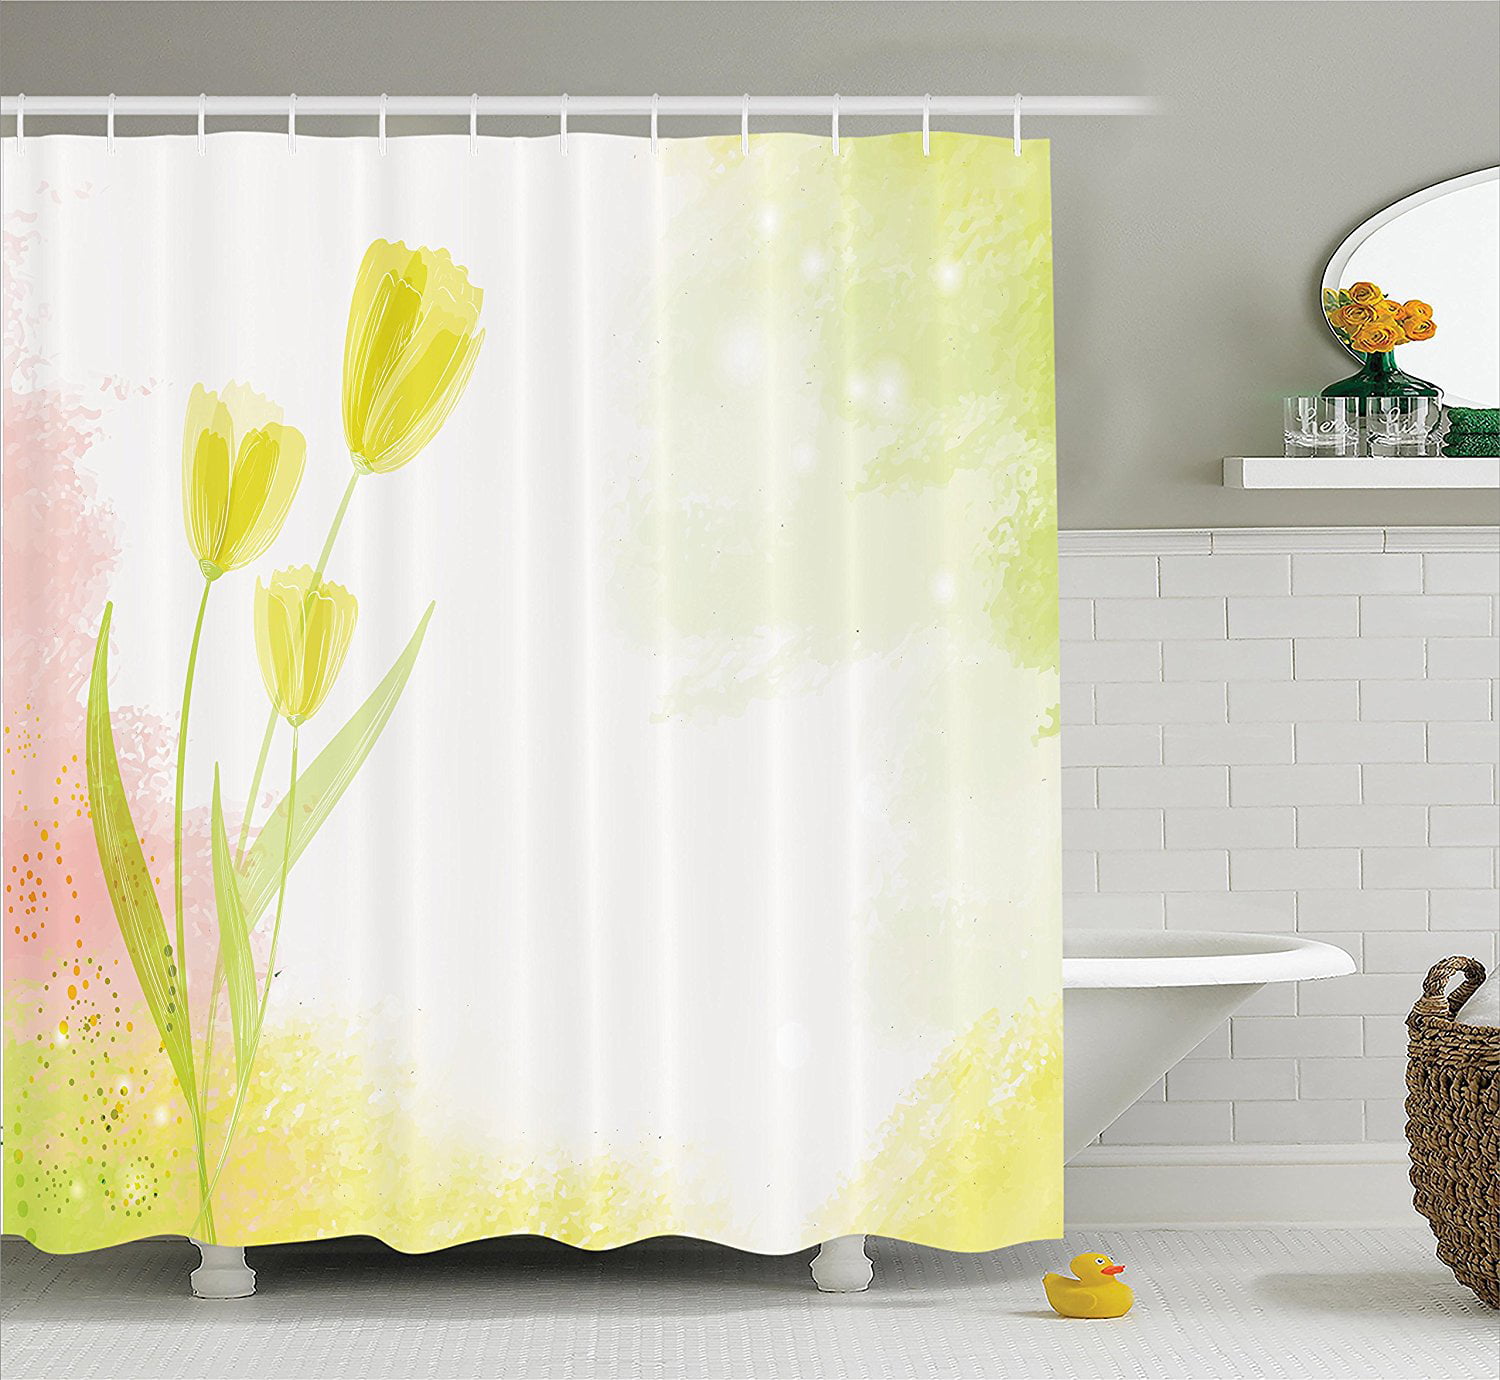 Details about   Shower Curtain Flower Purple Floral Dragonfly Spring Bathroom Decor 70" New 